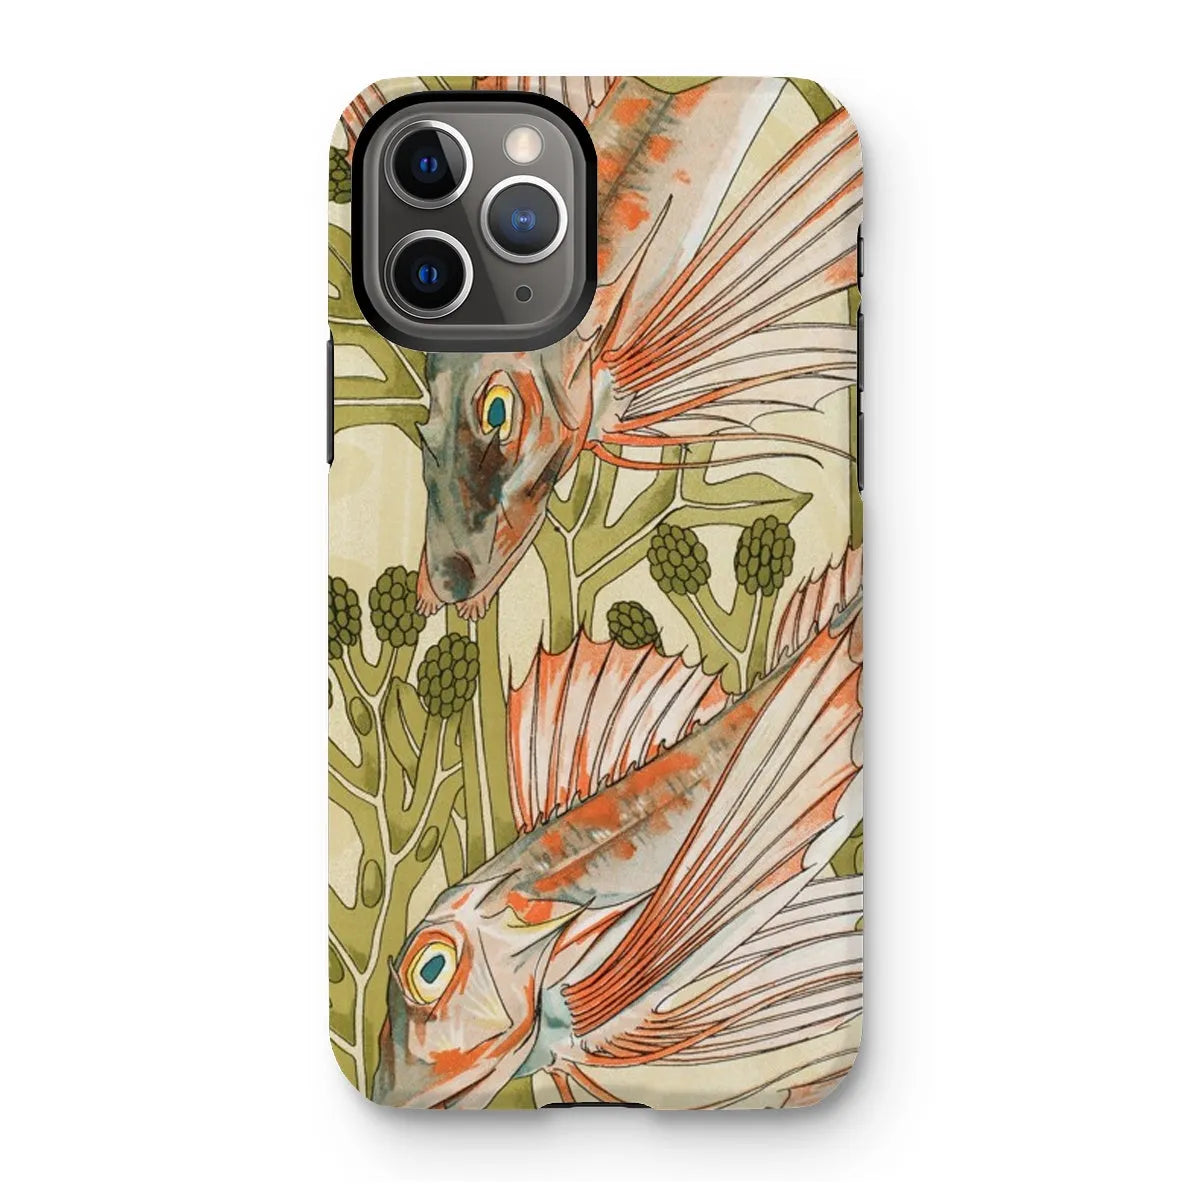 Red Fish - Animal Art Phone Case - Maurice Pillard Verneuil - Iphone 11 Pro / Matte - Mobile Phone Cases - Aesthetic Art